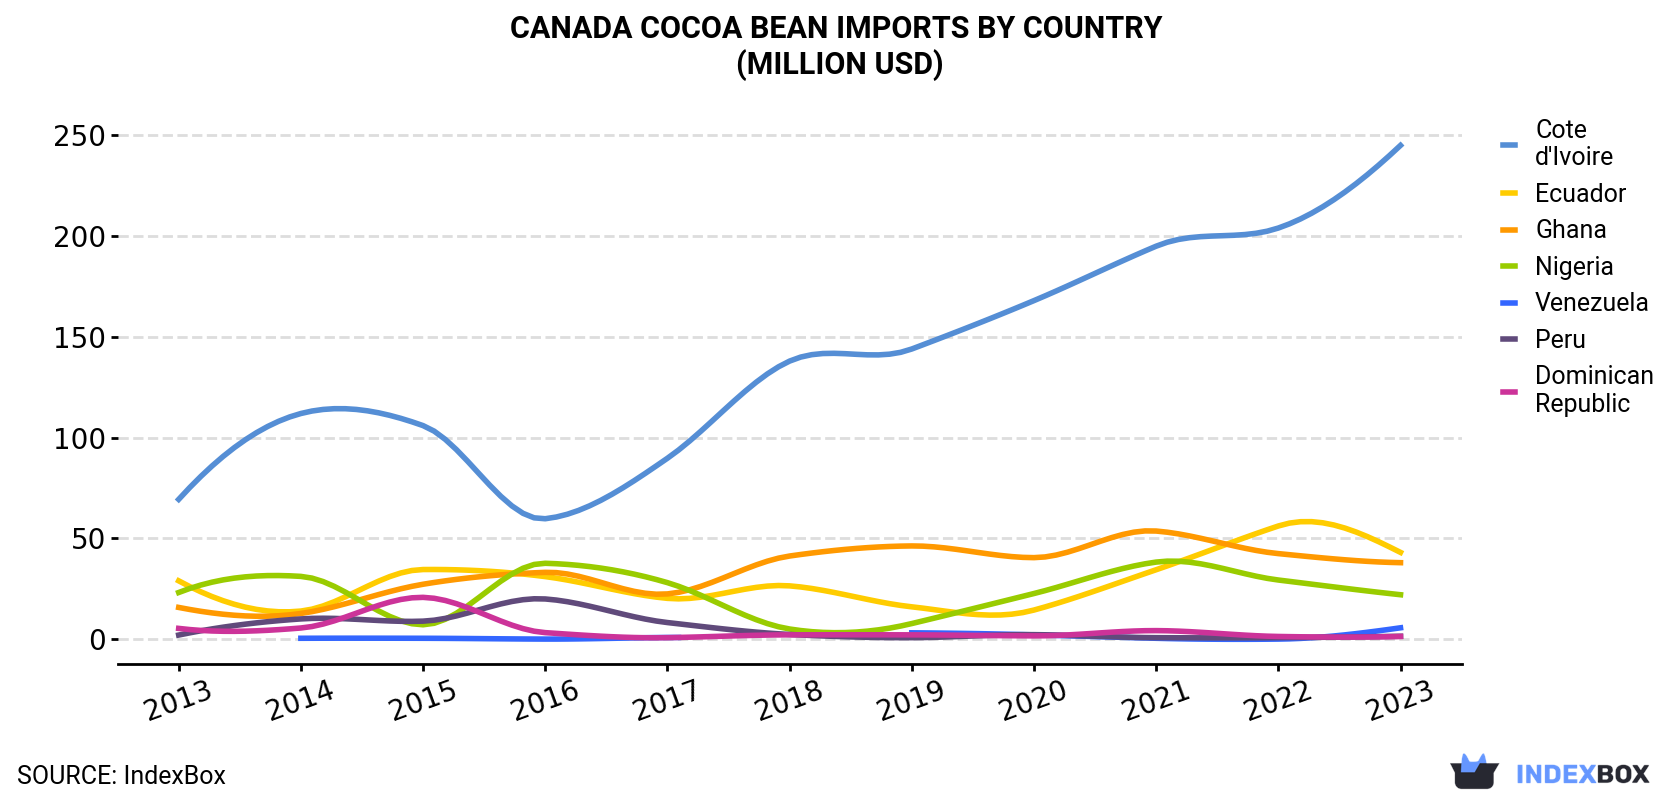 Canada Cocoa Bean Imports By Country (Million USD)